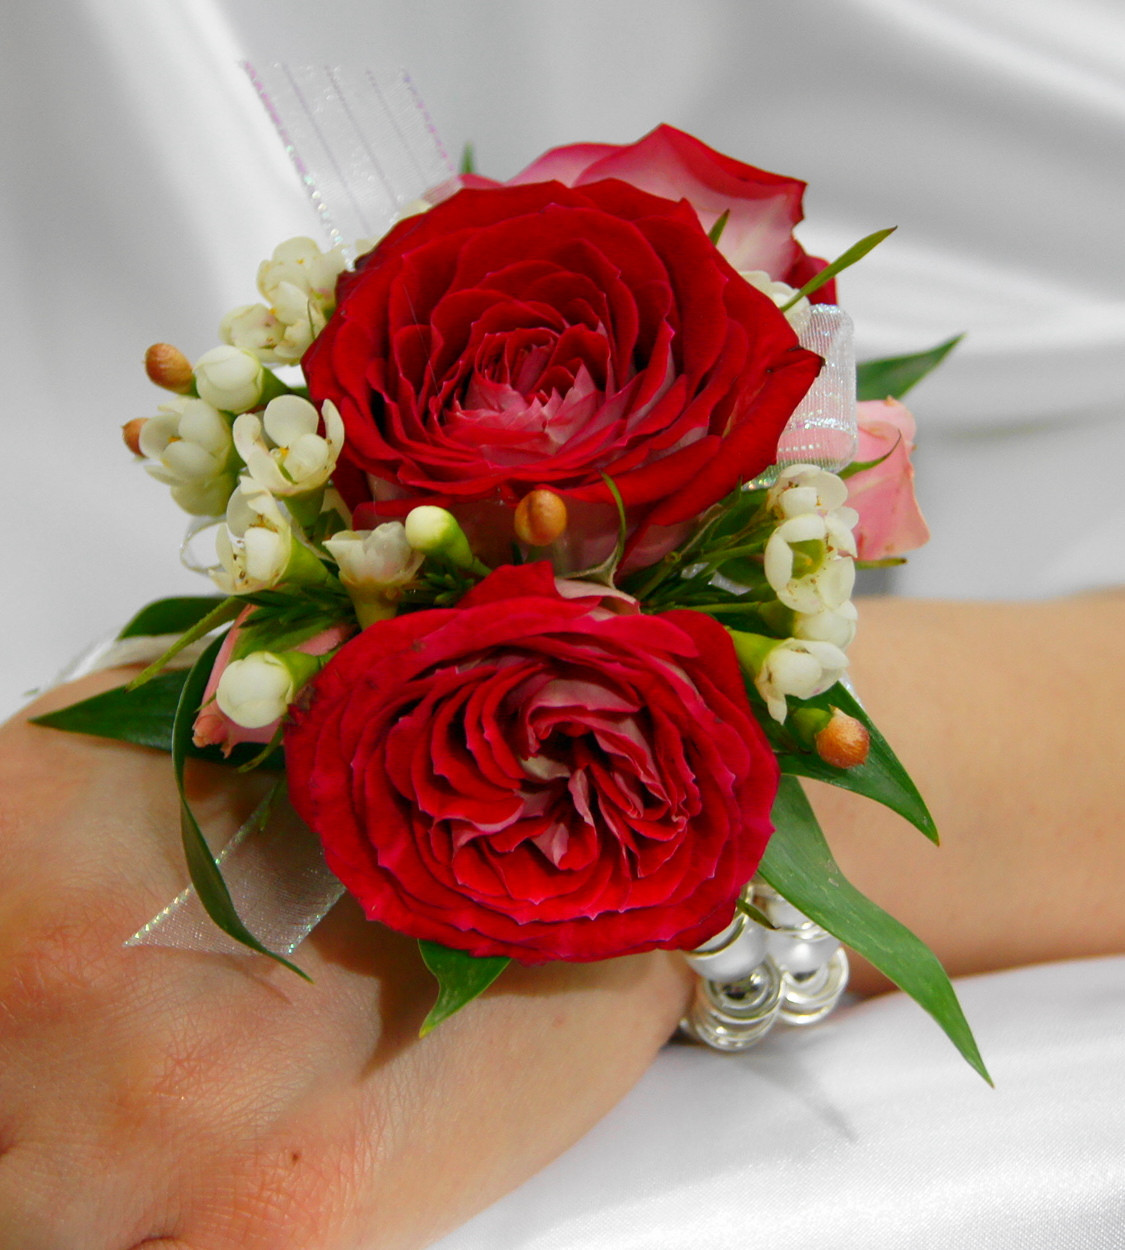 funeral corsage Rainbow rose funeral flowers heart wreath memorial artificial grave